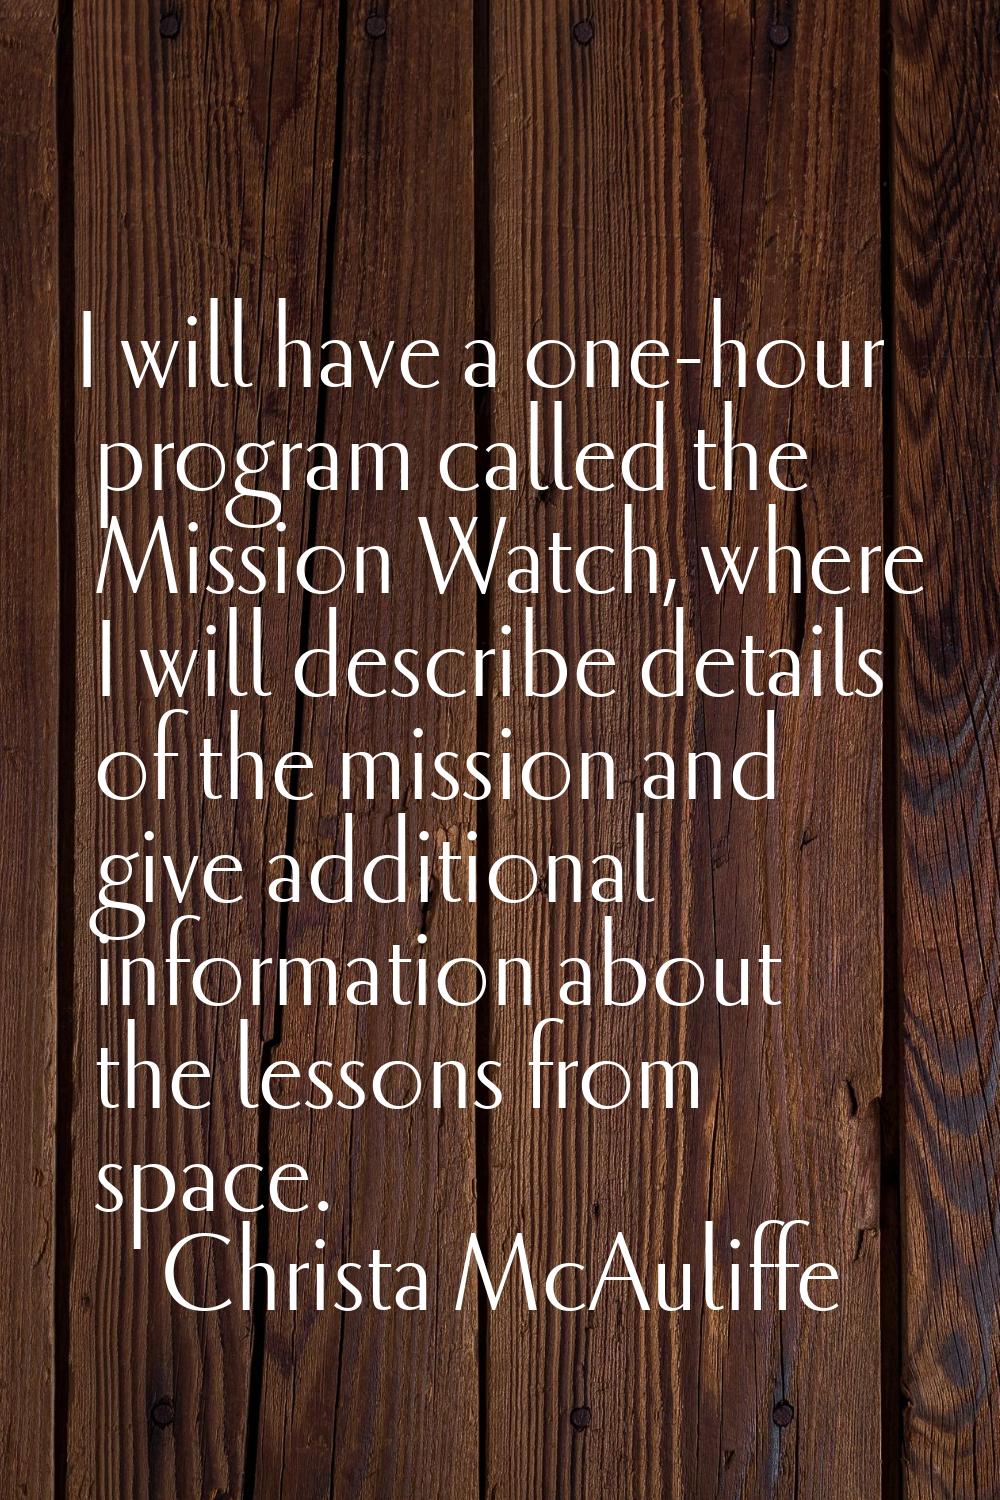 I will have a one-hour program called the Mission Watch, where I will describe details of the missi